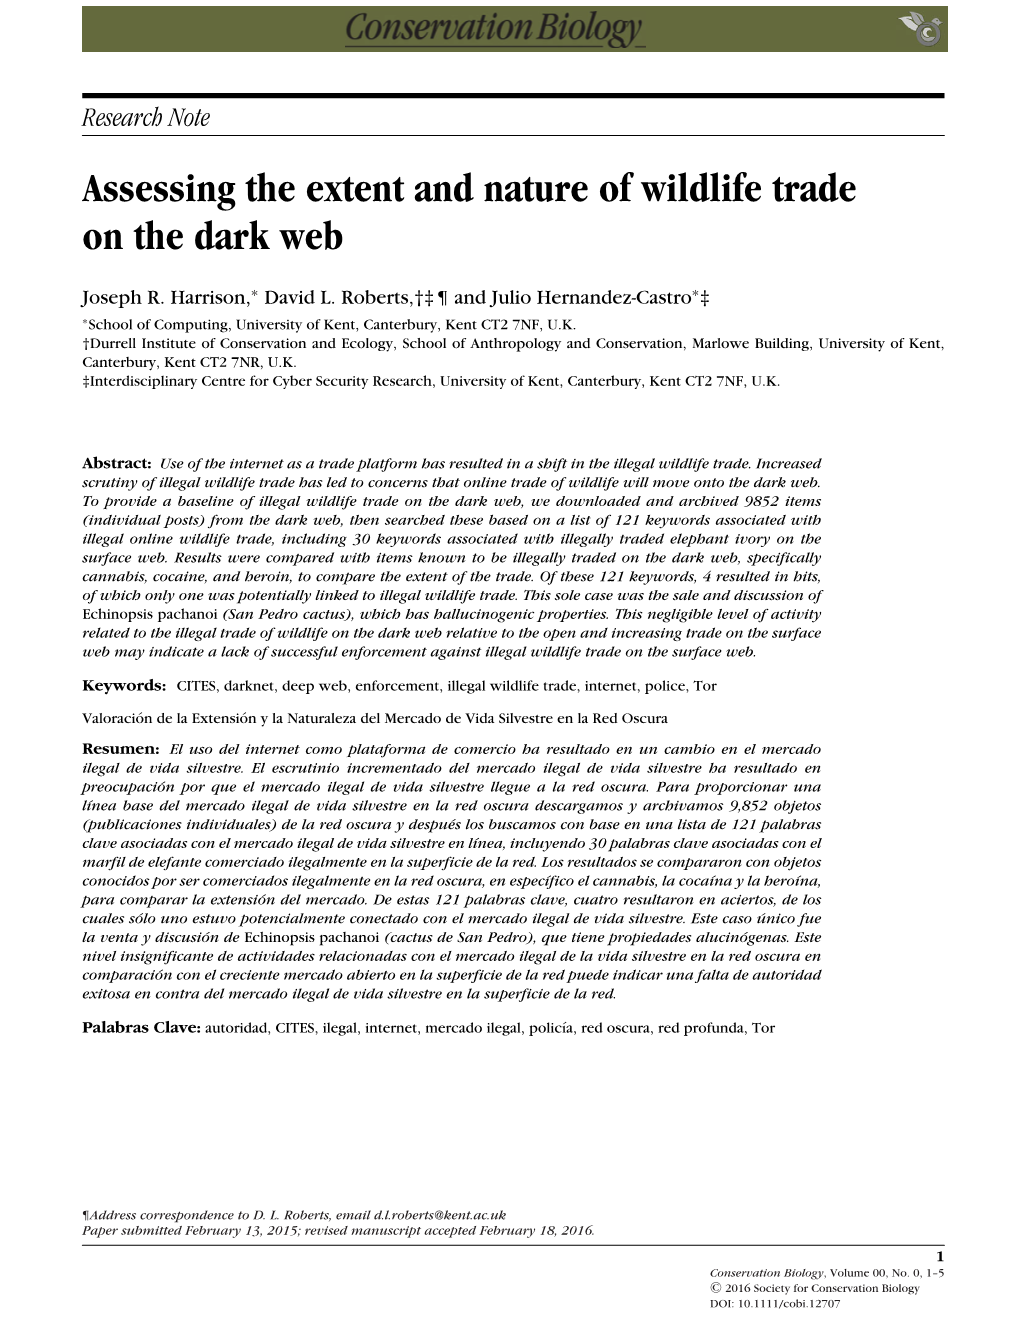 Assessing the Extent and Nature of Wildlife Trade on the Dark Web